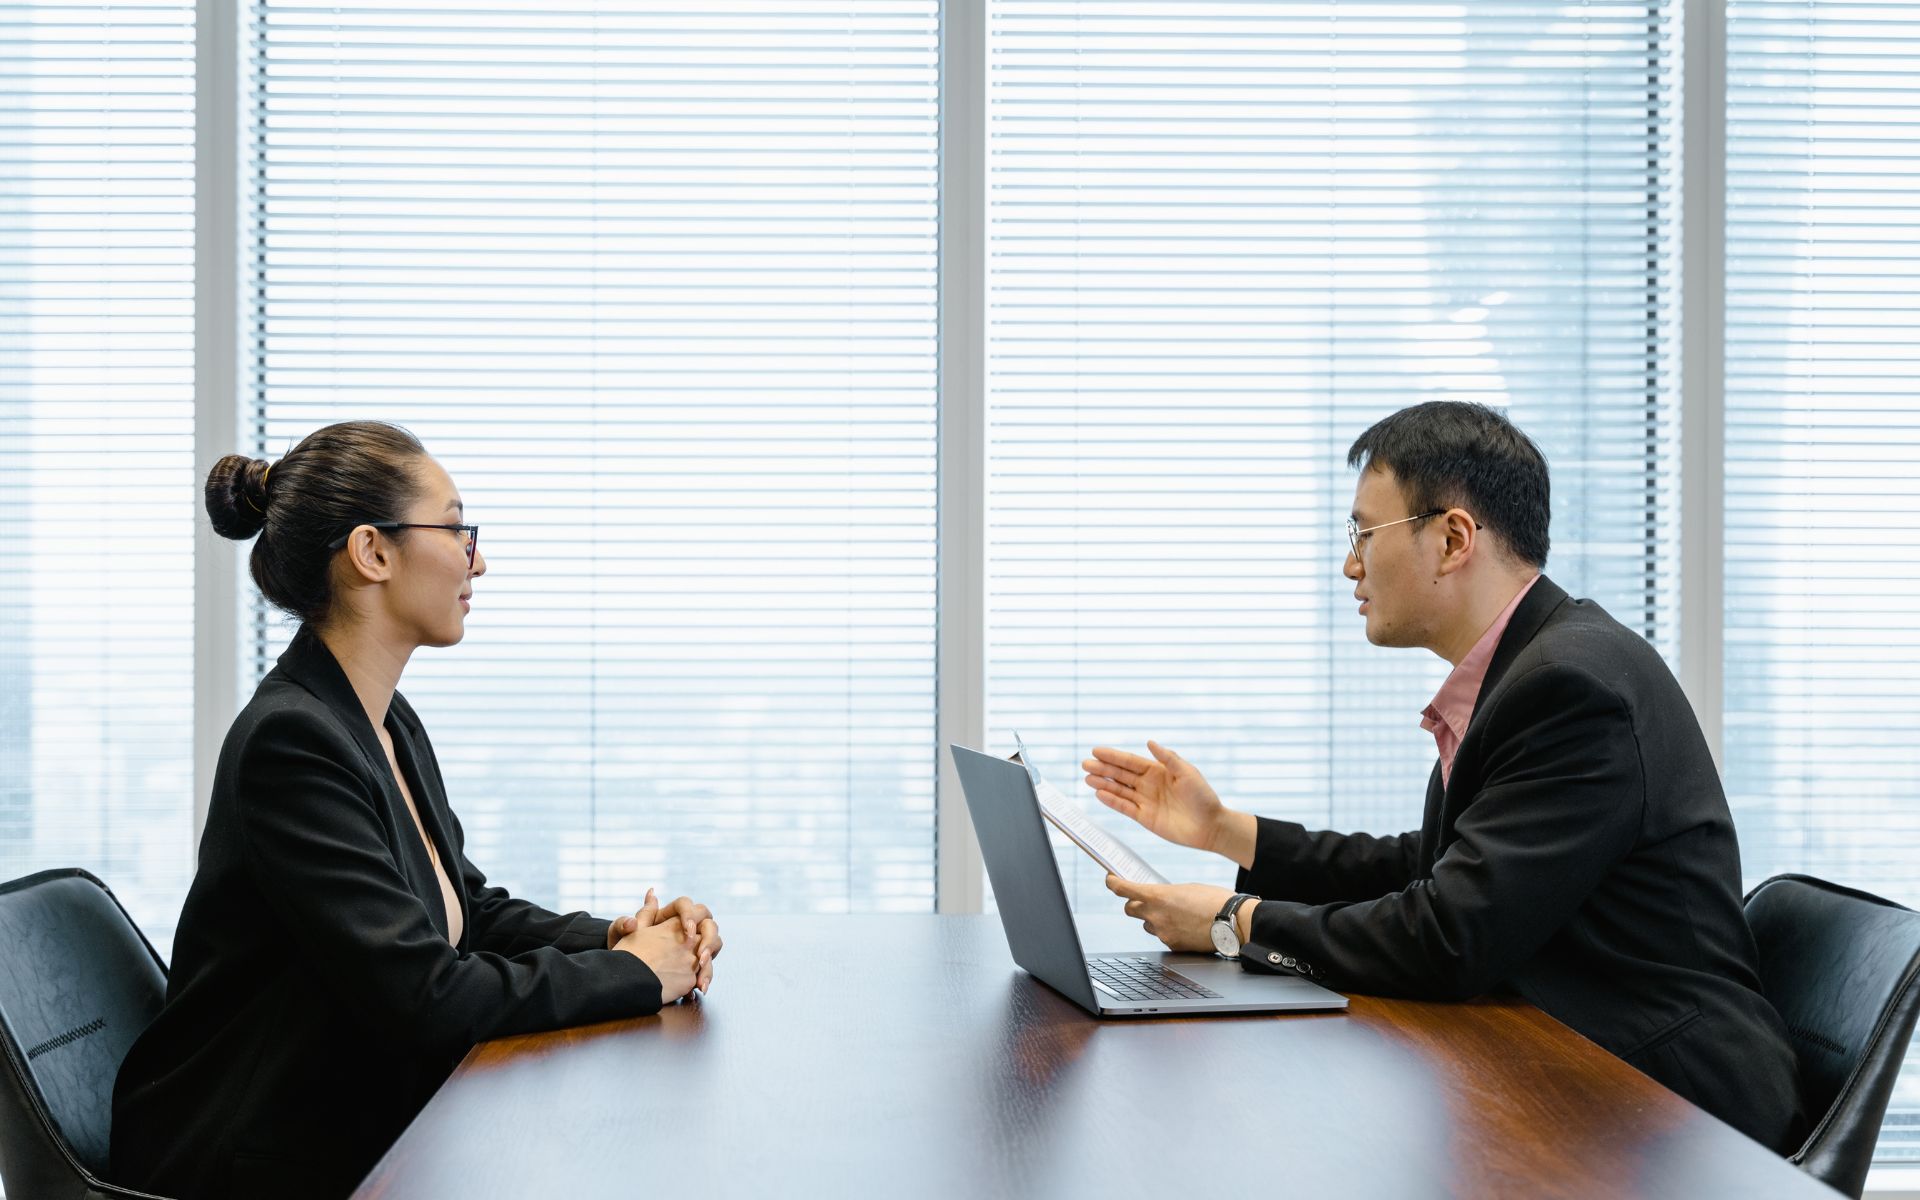 30 Important Things You Should Know Before Your Job Interview